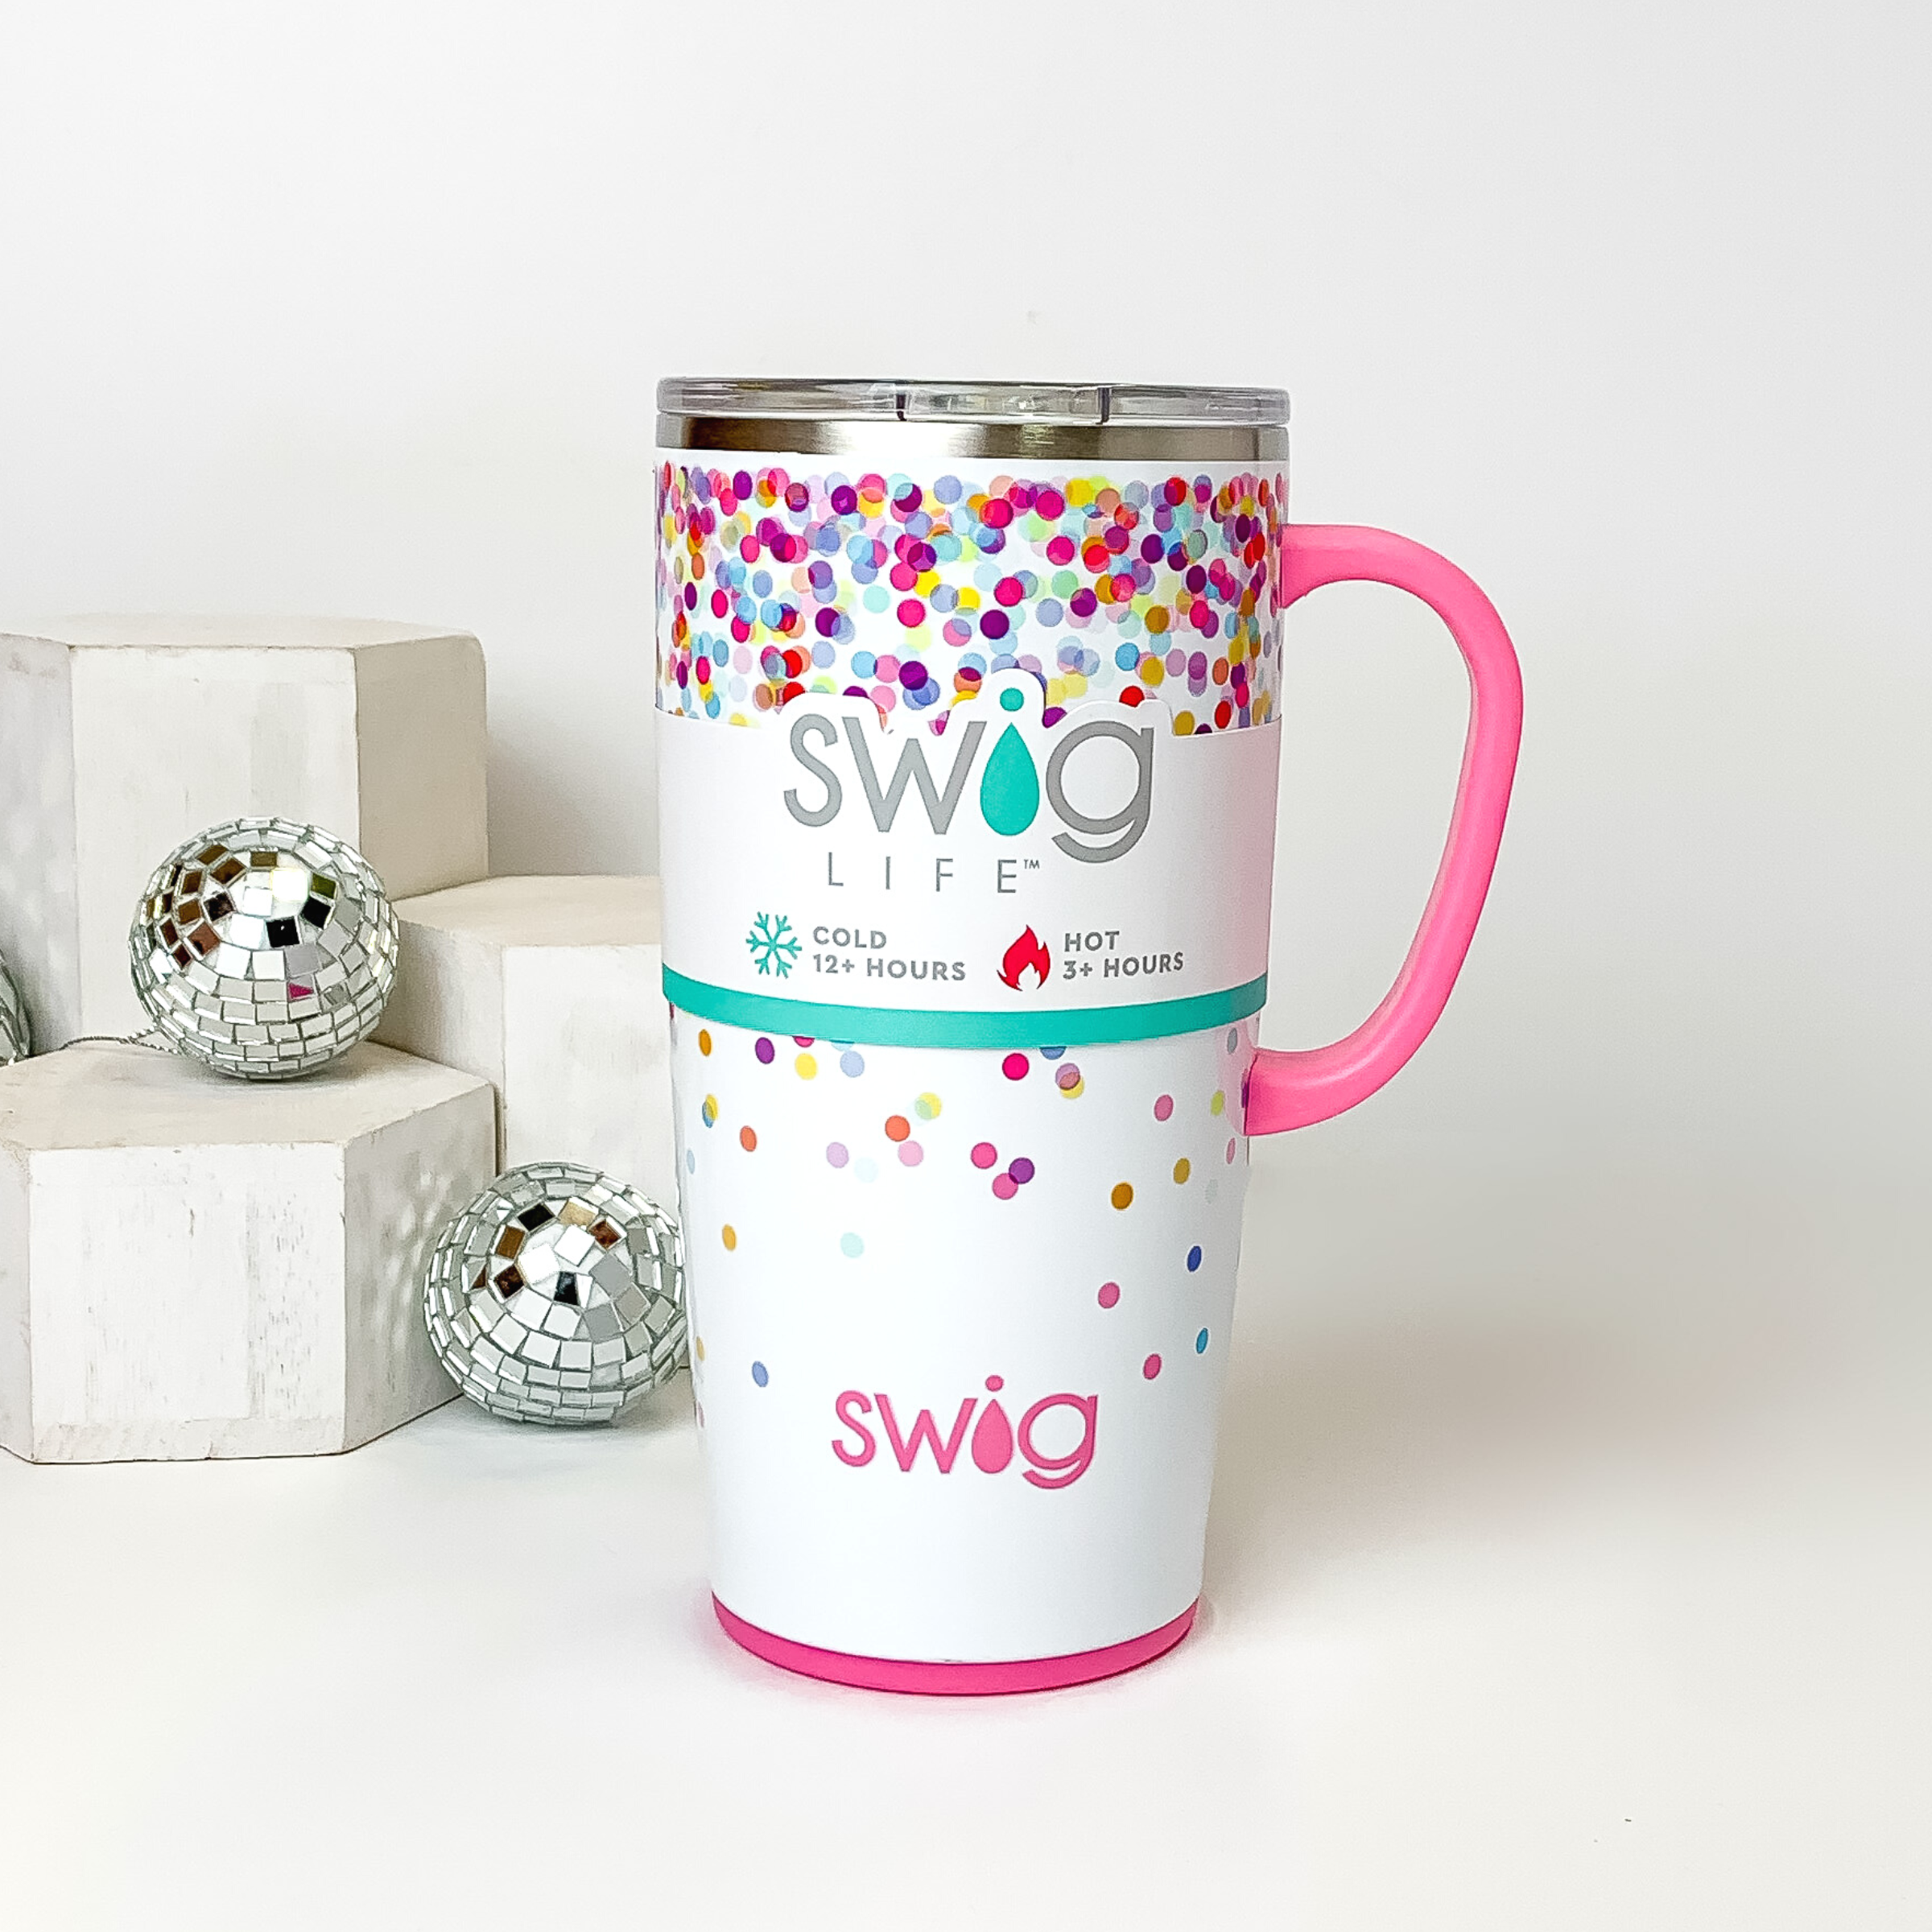 Swig Life - Load up your sleigh with holiday goodies galore — like our new  Hollydays collection in fan-favorite shapes 🎄❄⛄ #takeaswig Now available  to shop at the link below! www.swiglife.com/collections/holiday